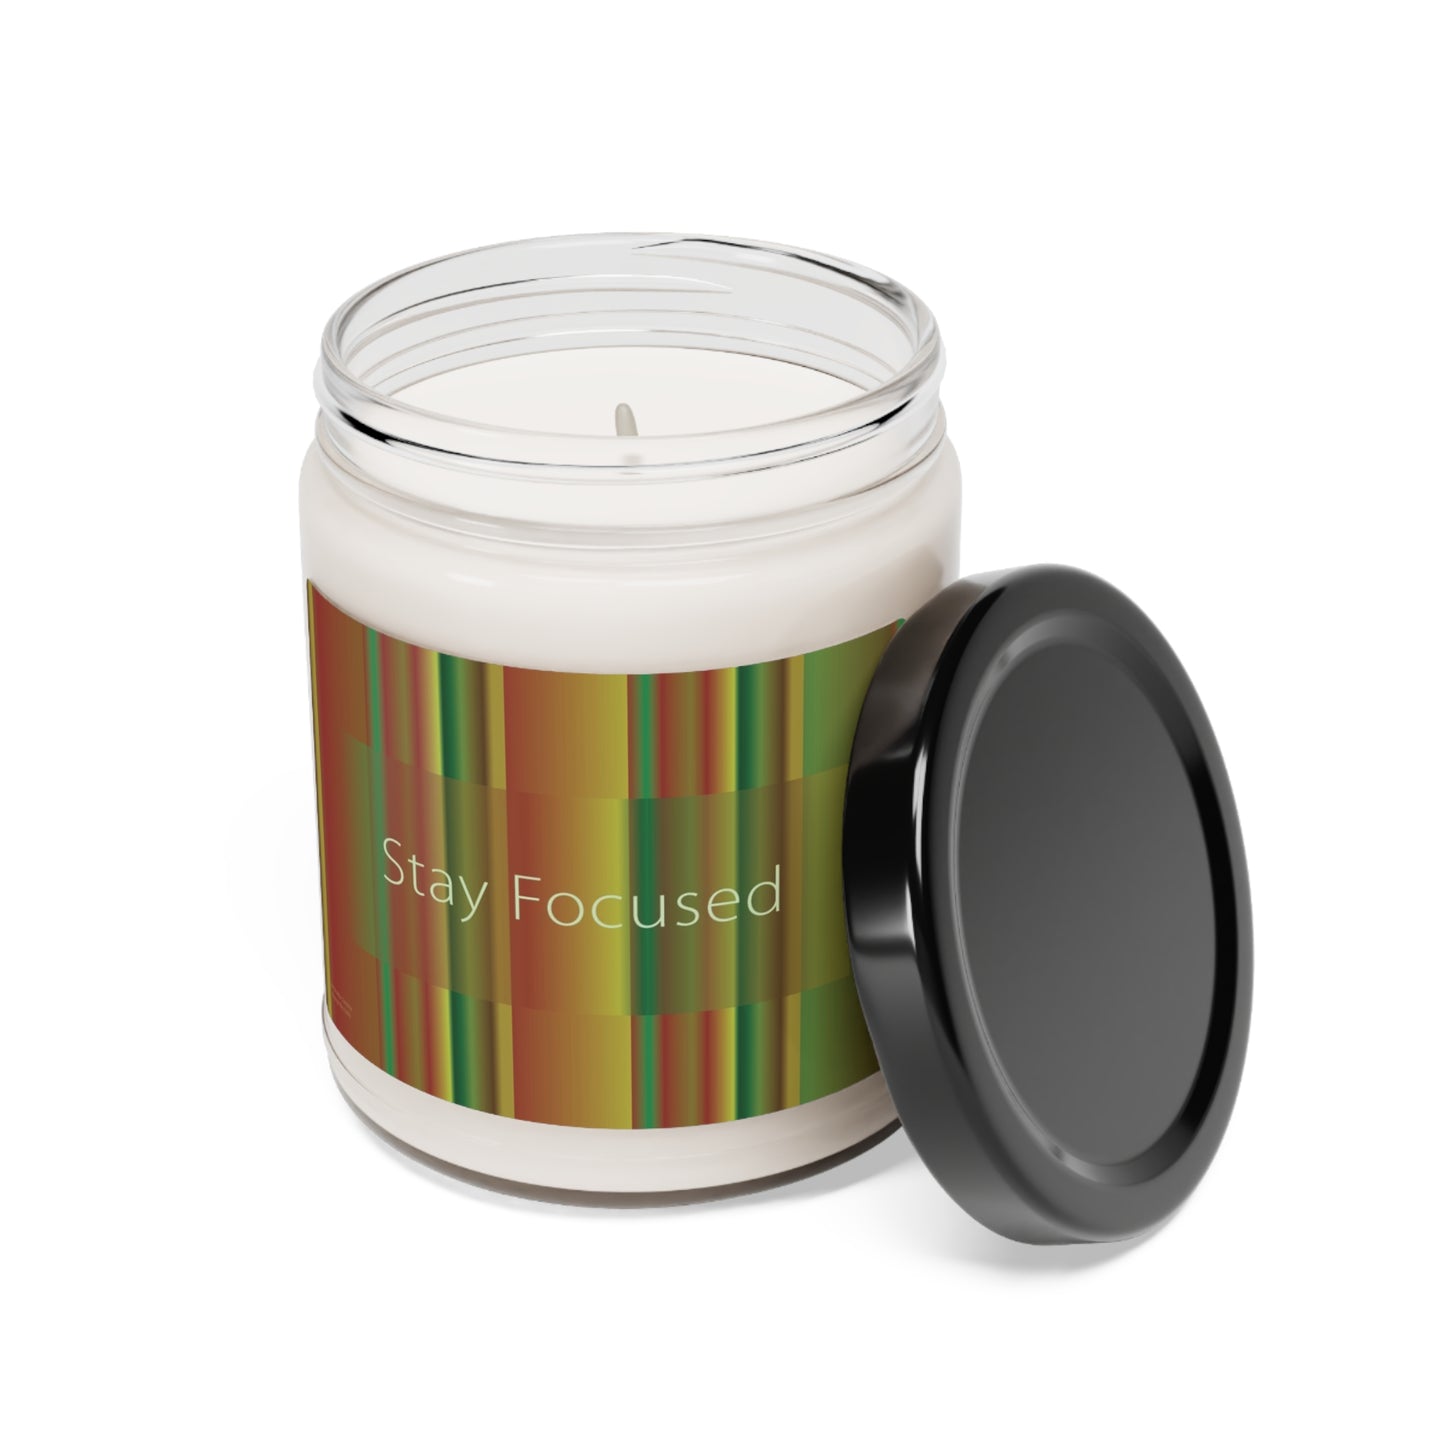 Scented Soy Candle, 9oz Stay Focused - Design No.1900